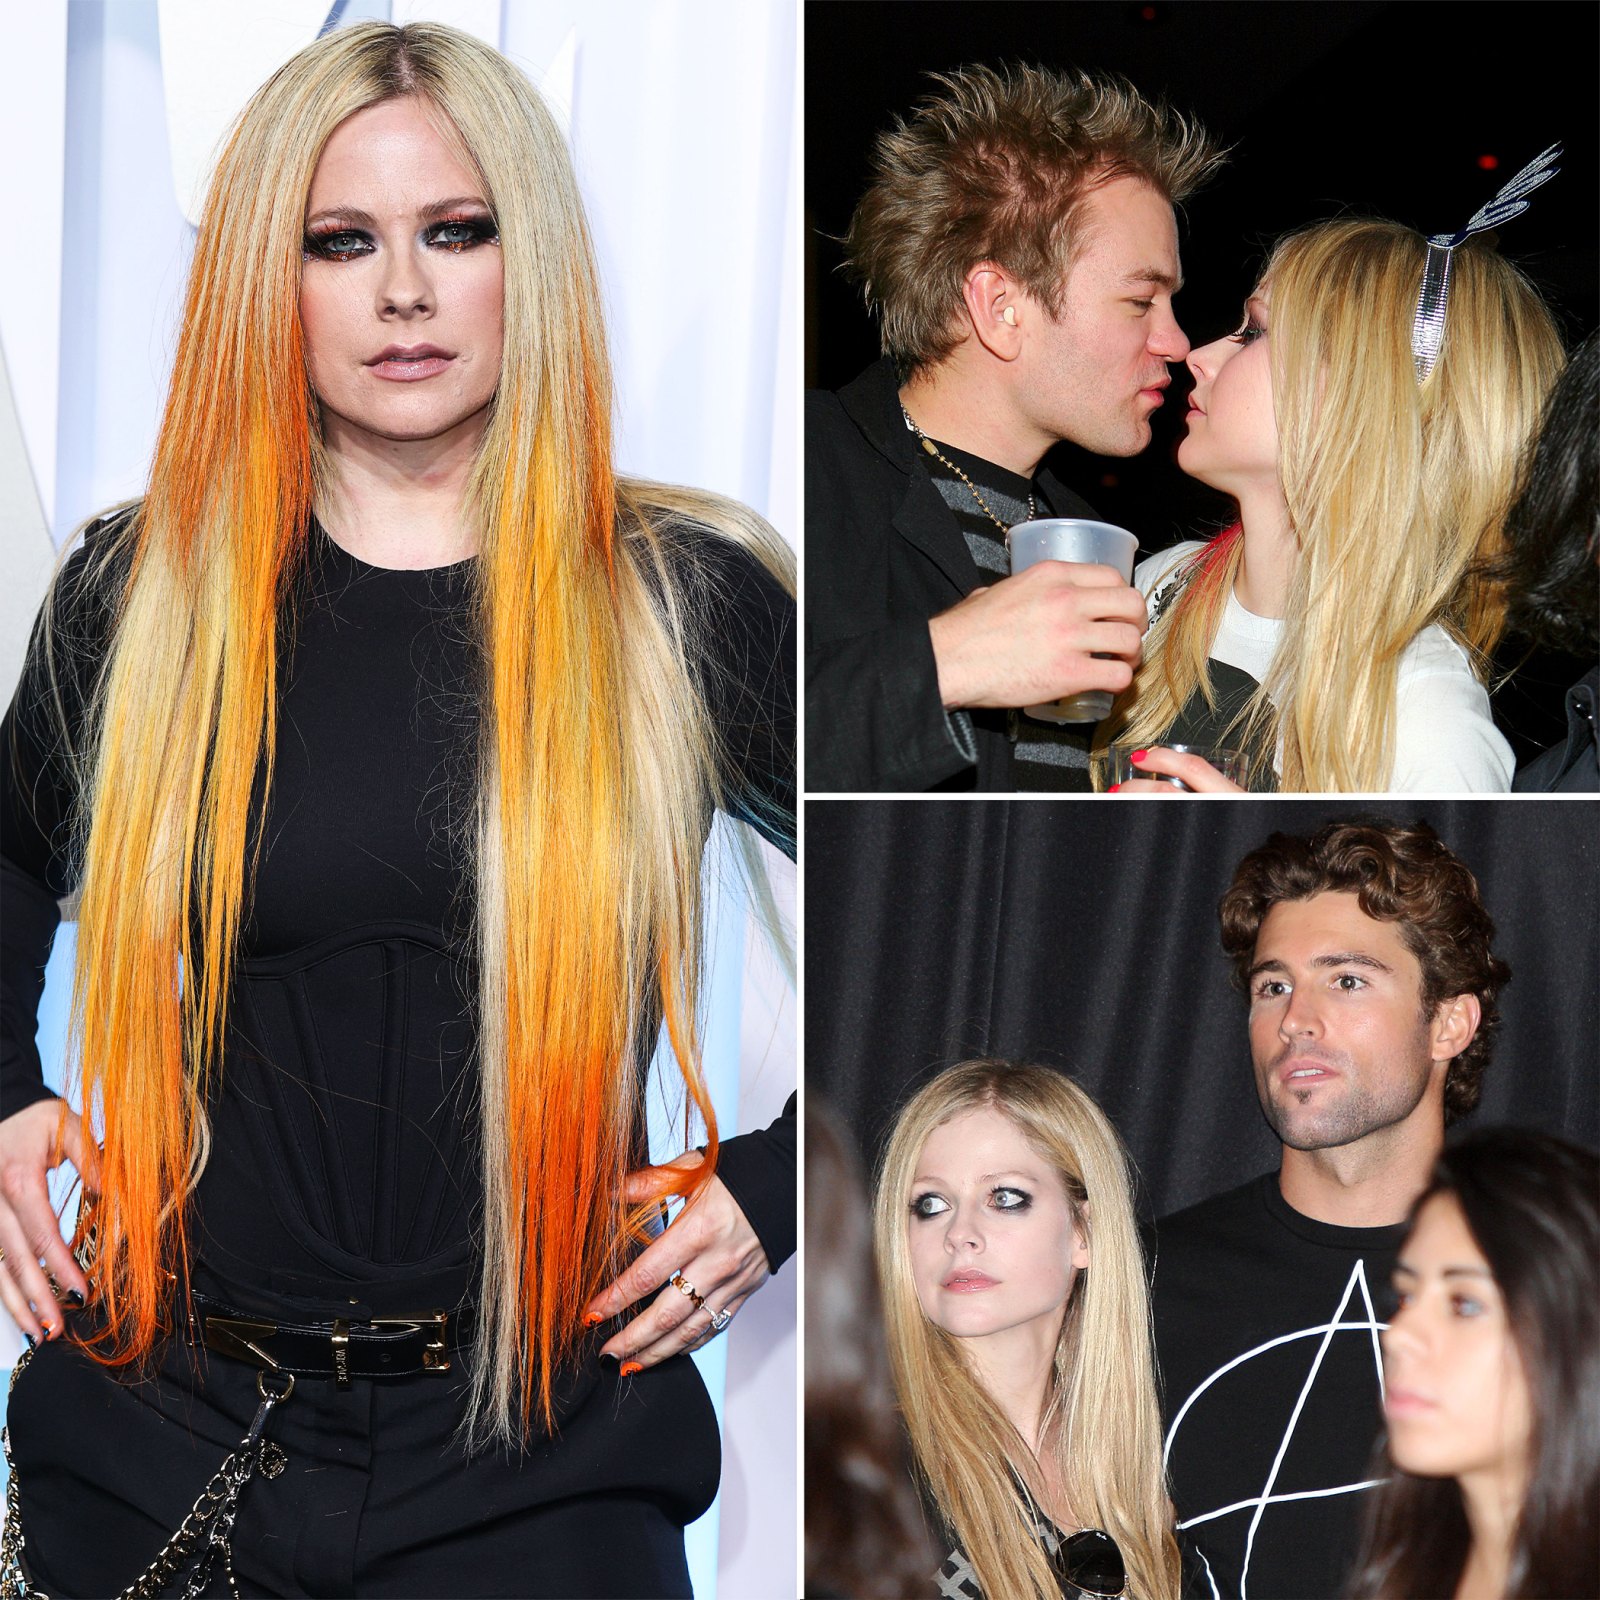 Avril Lavigne's Dating History- Avril Lavigne's Dating History- Deryck Whibley, Brody Jenner, Chad Kroeger, Mod Sun, More - 311